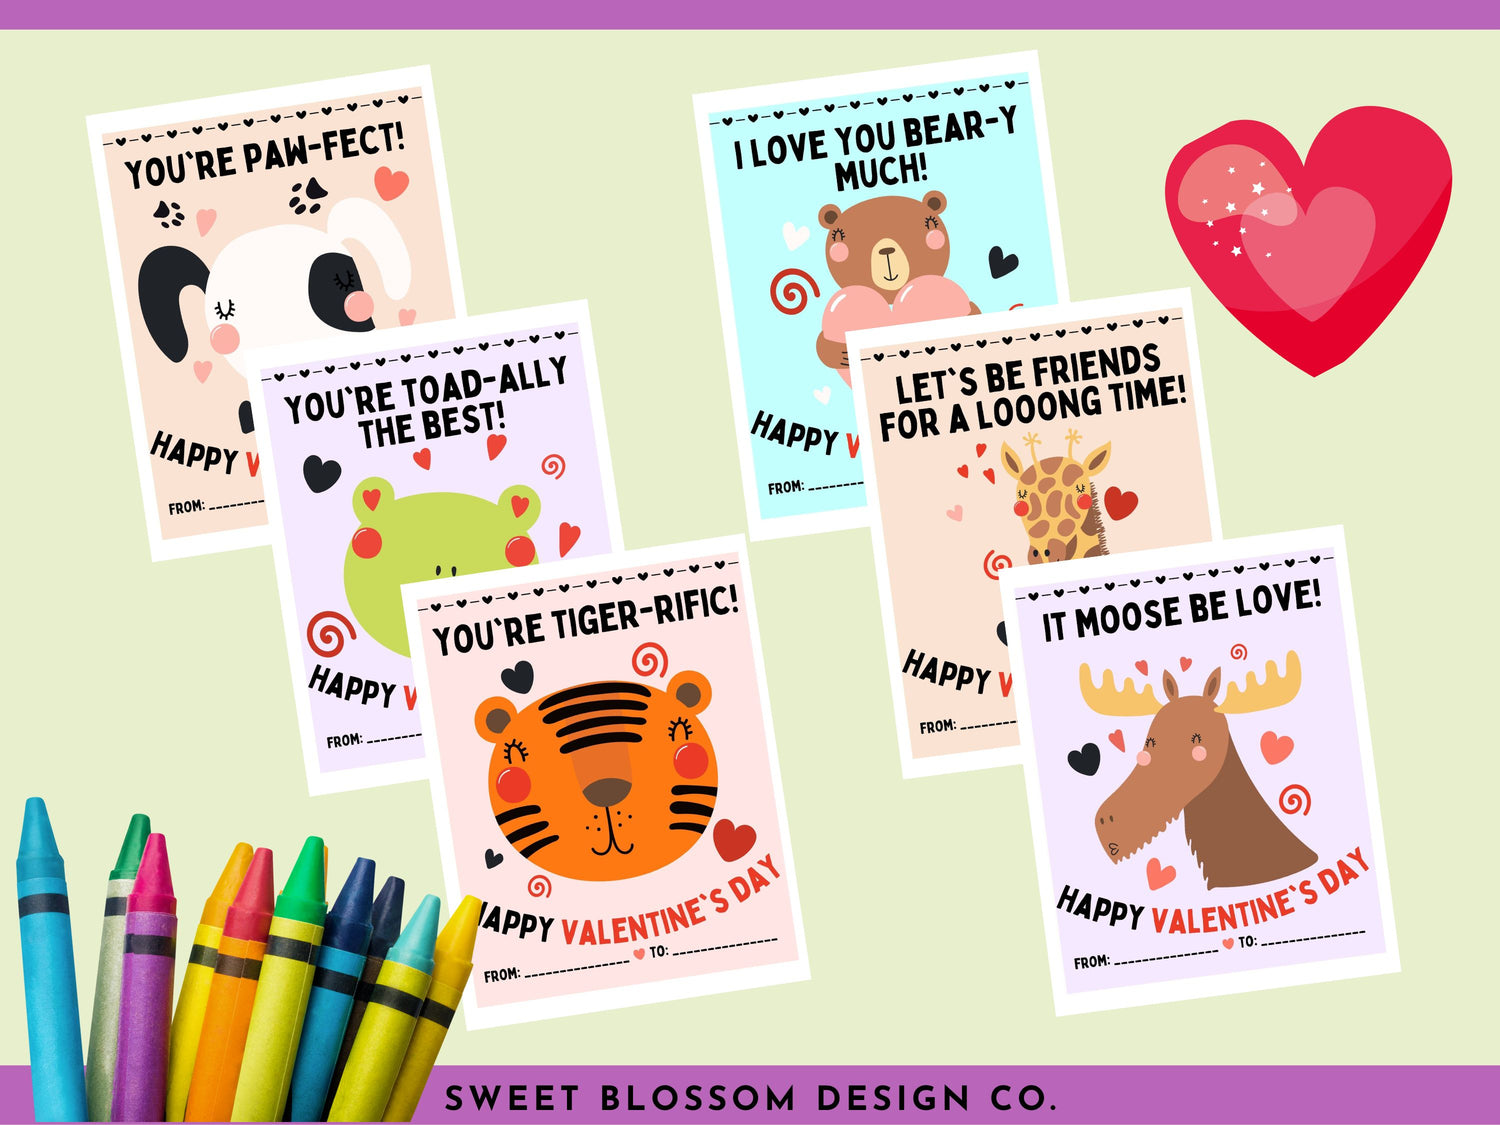 Printable animal valentine cards for kids are a fun and easy way to spread Valentine&